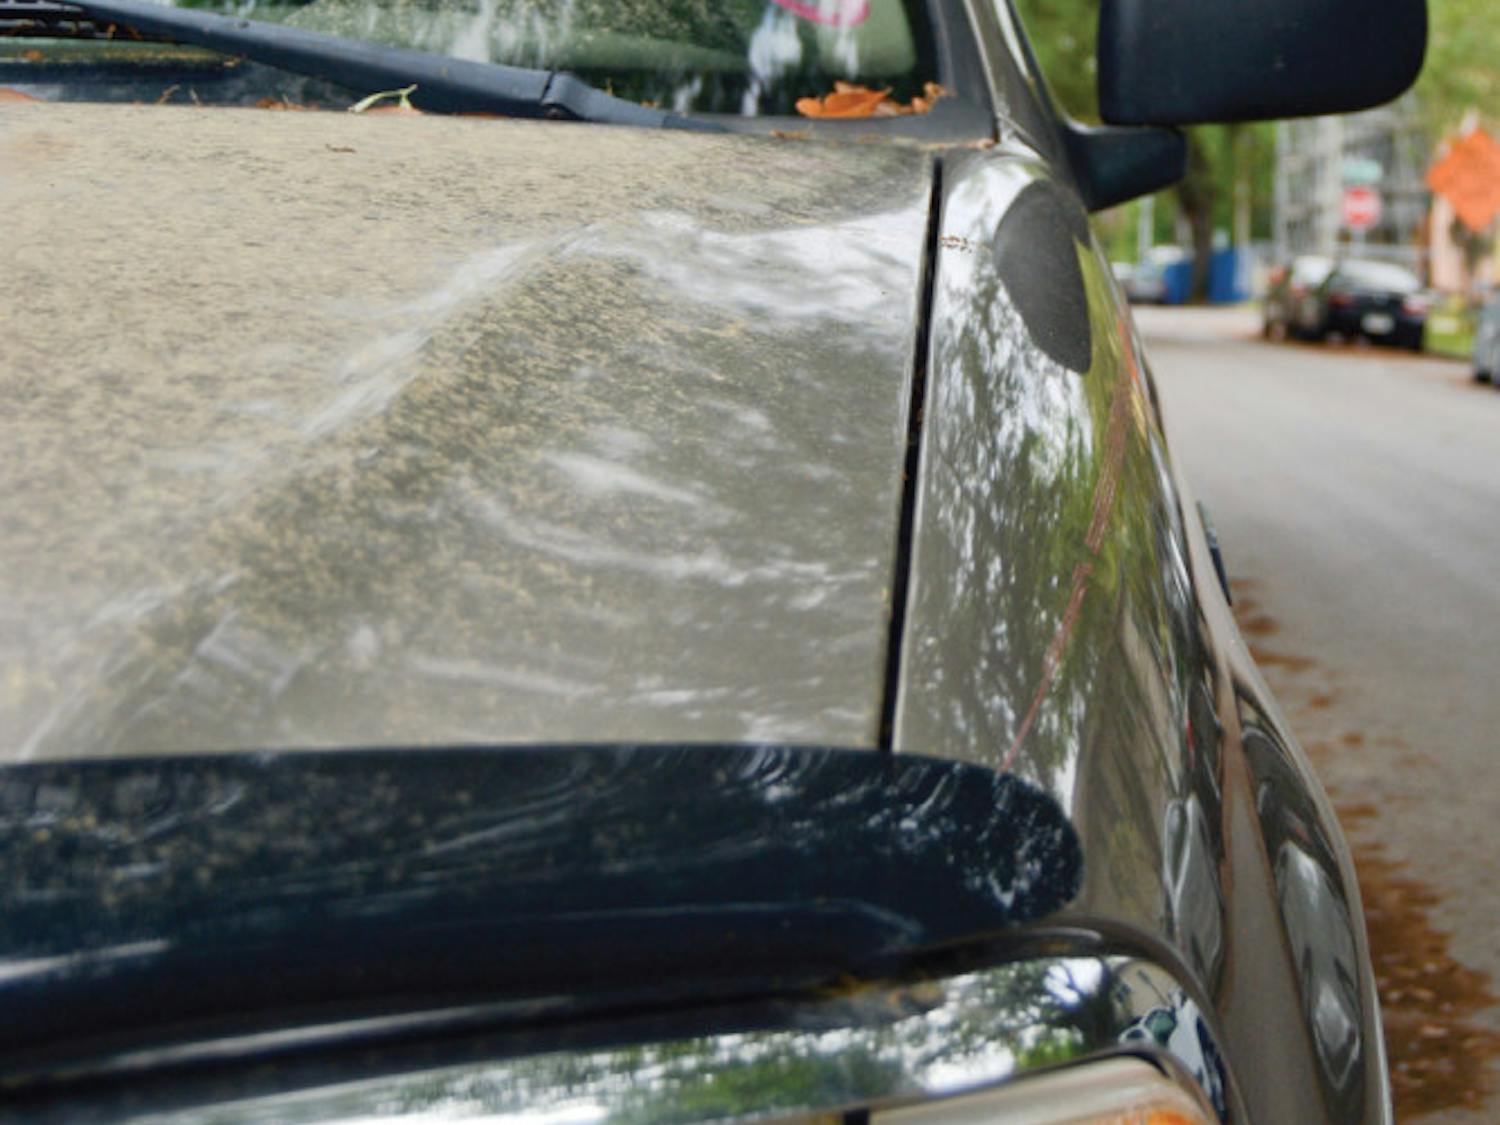 Pictured is the hood of a pickup truck covered in pollen on Southwest First Avenue.